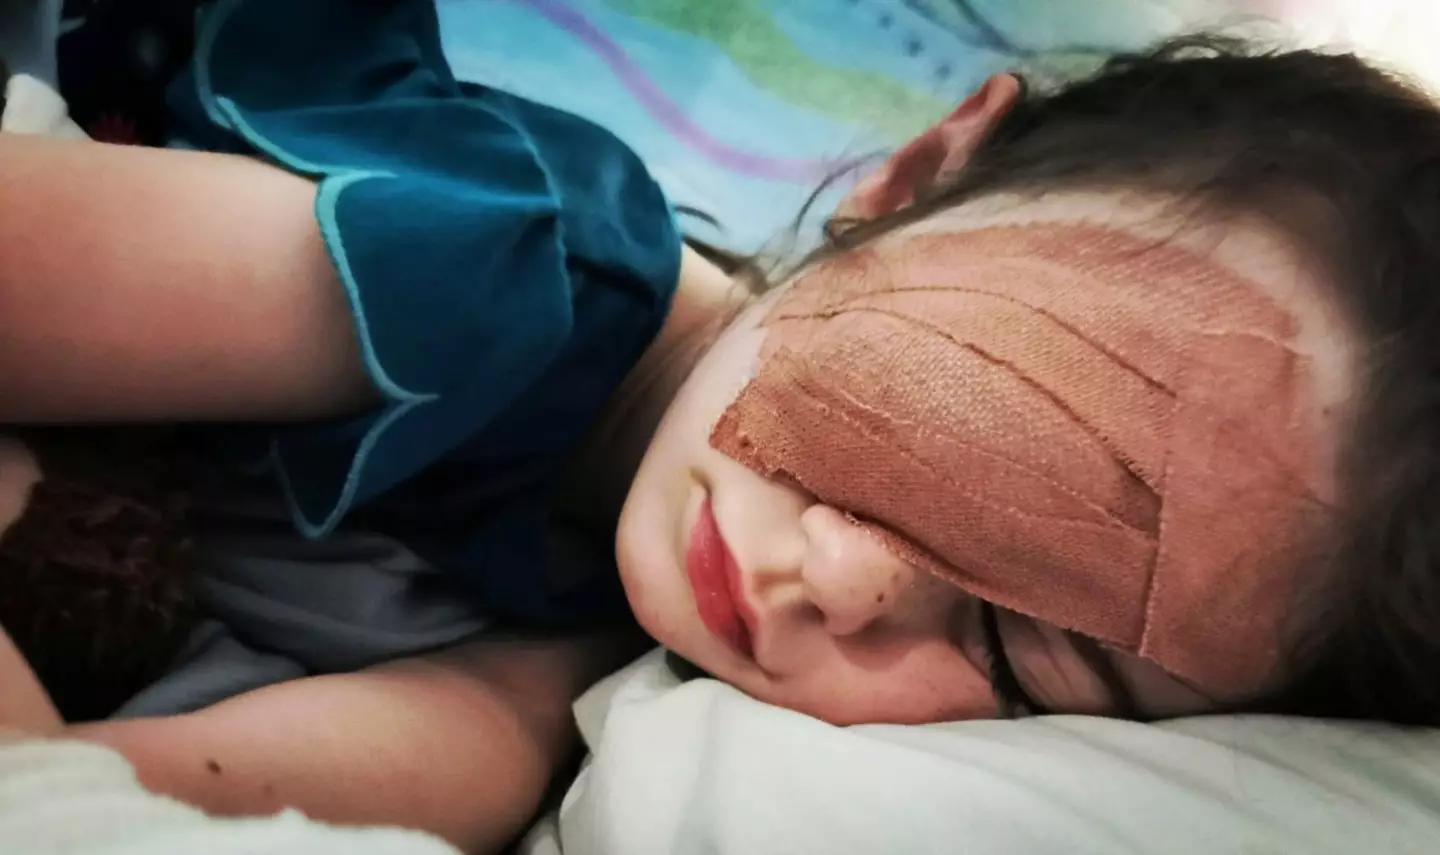 The brave youngster had to have an operation to remove her eye.